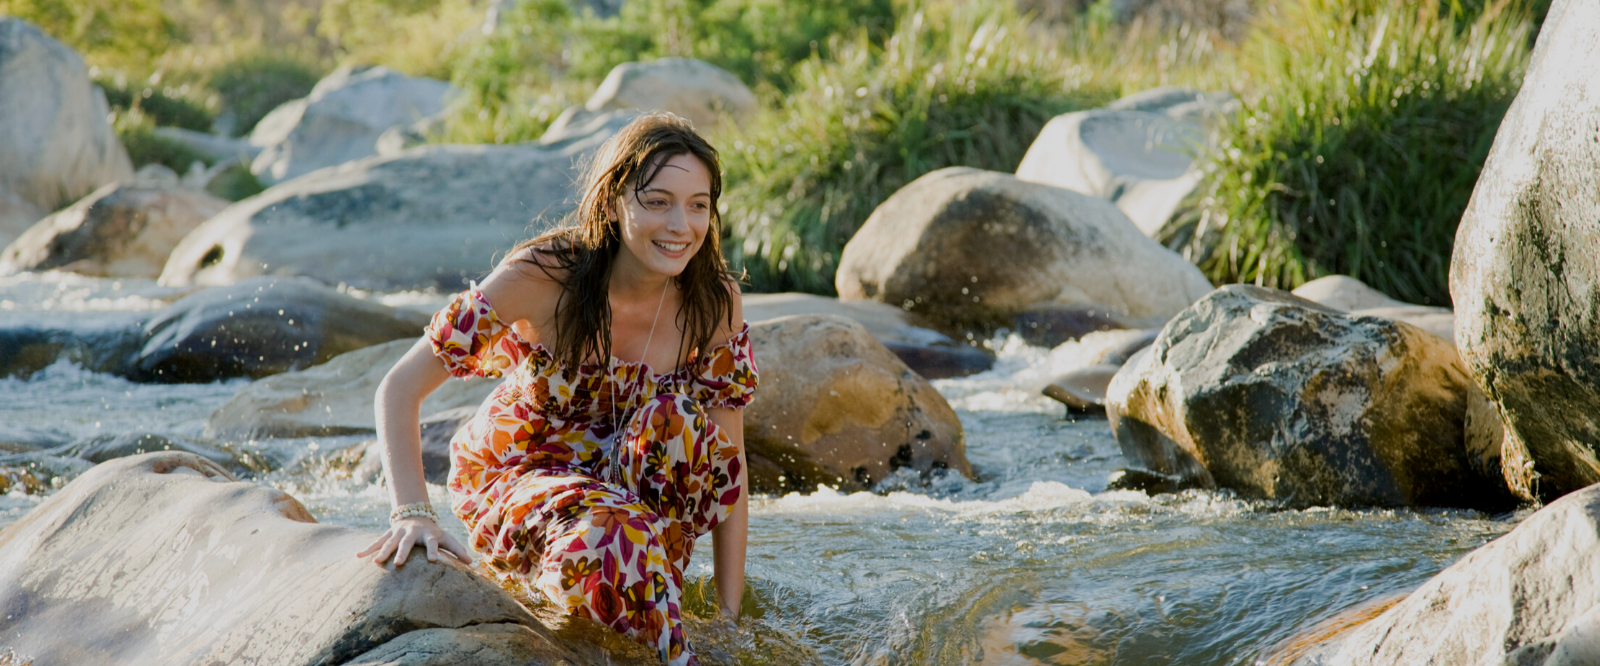 woman crouching in creek after using natural skin care